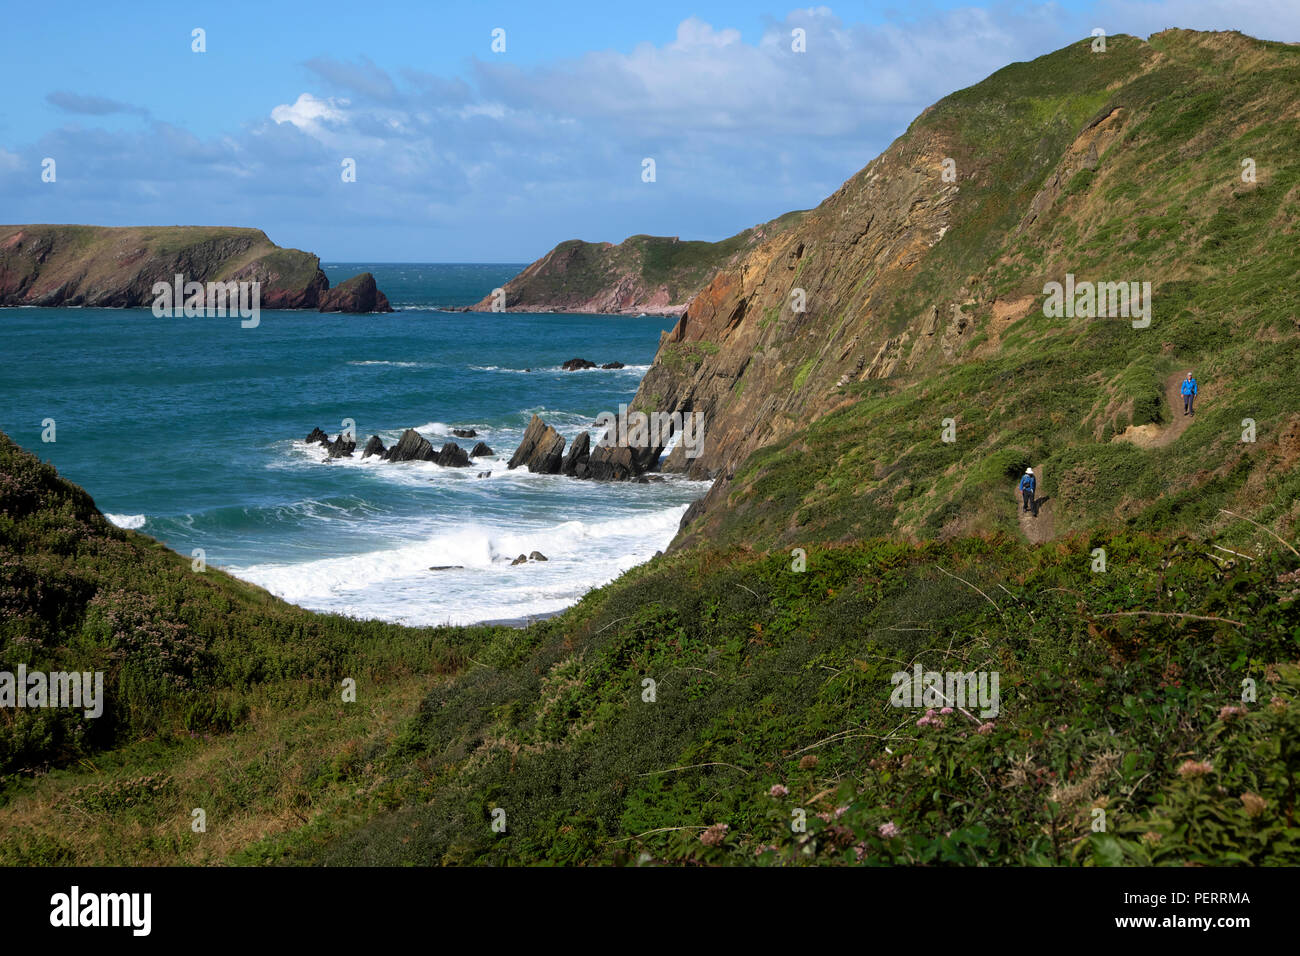 Two walkers on the coastal path near Marloes Sands beach and Gateholm Island with the sea at high tide Pembrokeshire West Wales UK  KATHY DEWITT Stock Photo